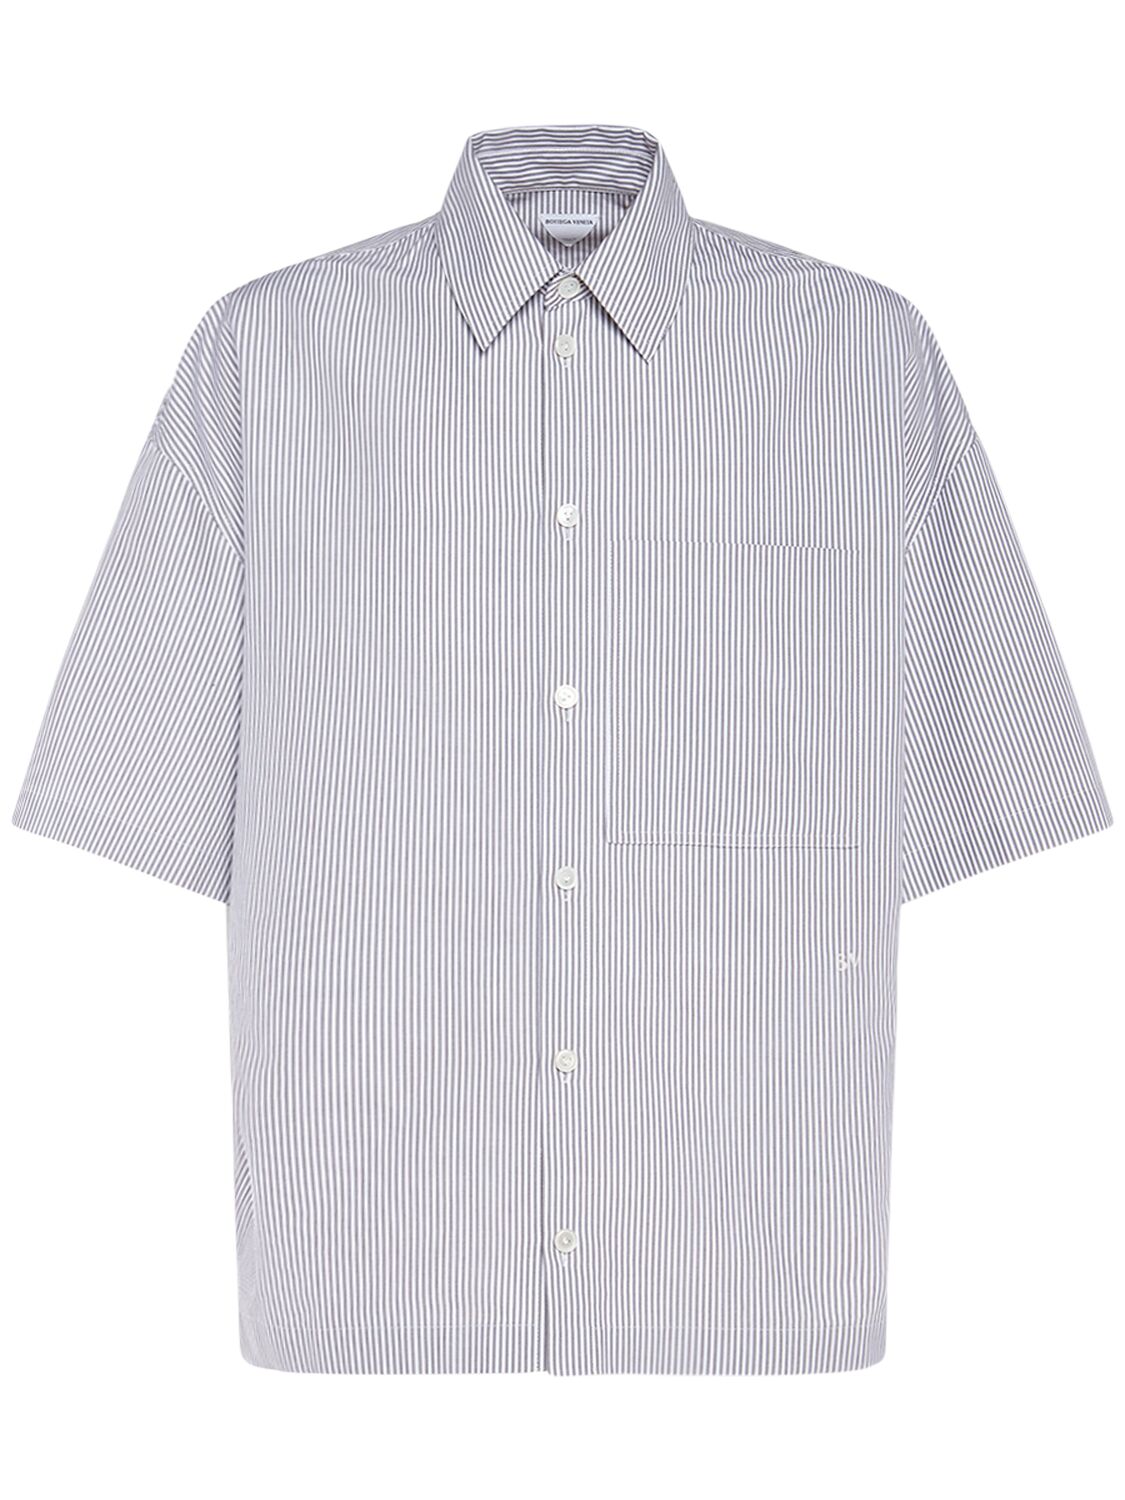 Image of Classic Striped Cotton Shirt